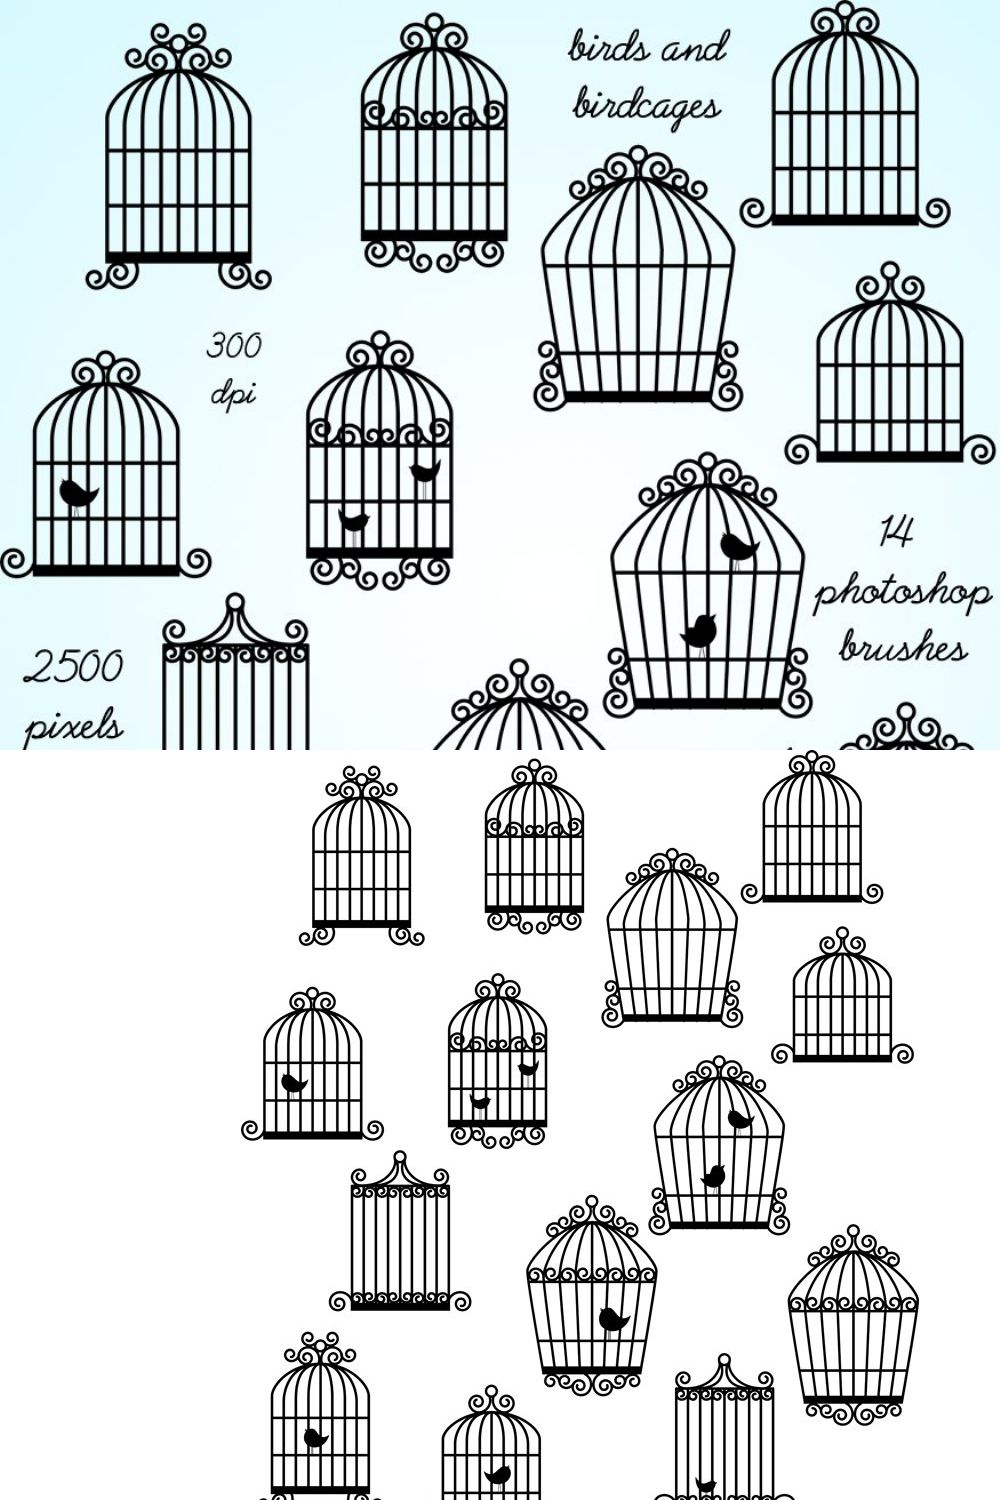 Birdcages Photoshop Brushes pinterest preview image.